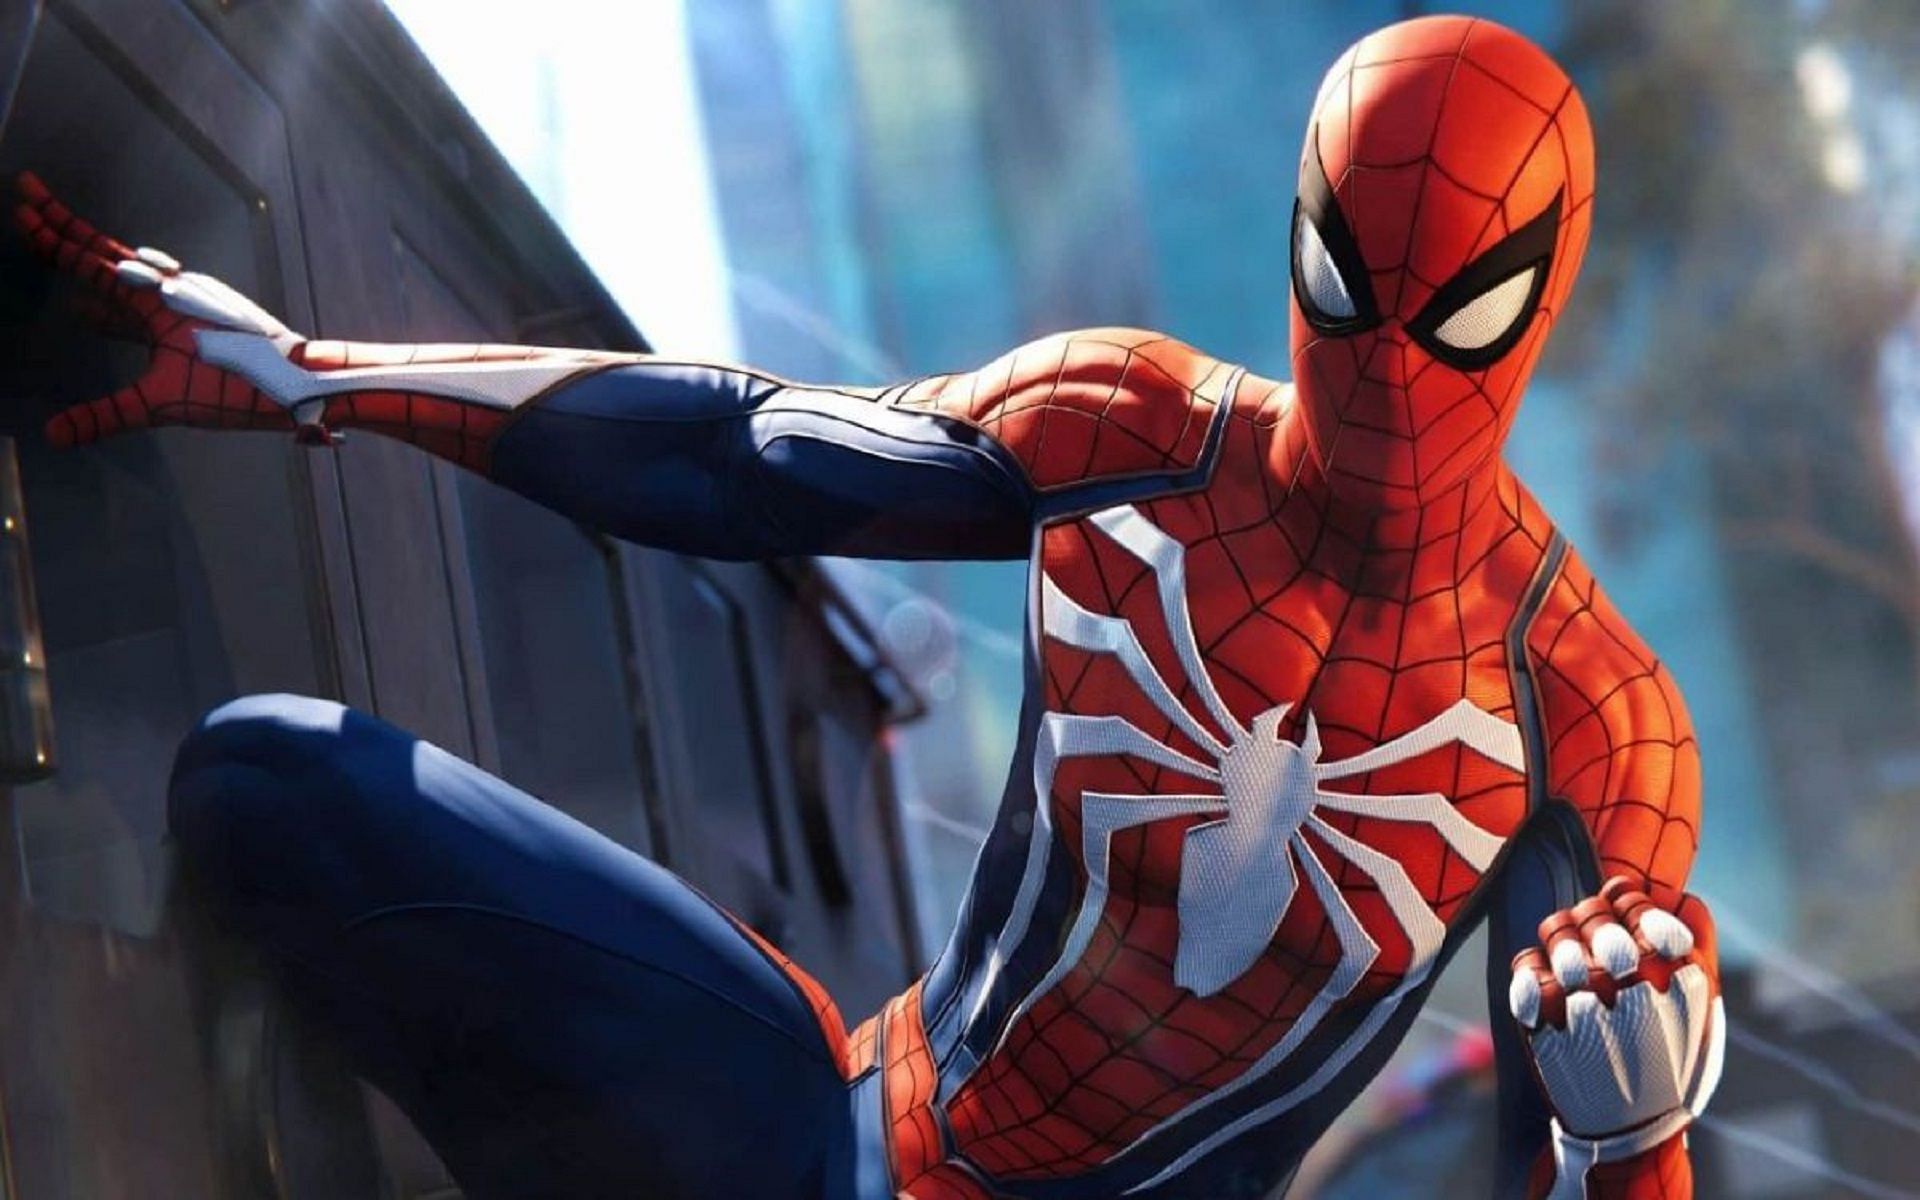 Spider-Man remastered is coming to PC (Image via Sony)